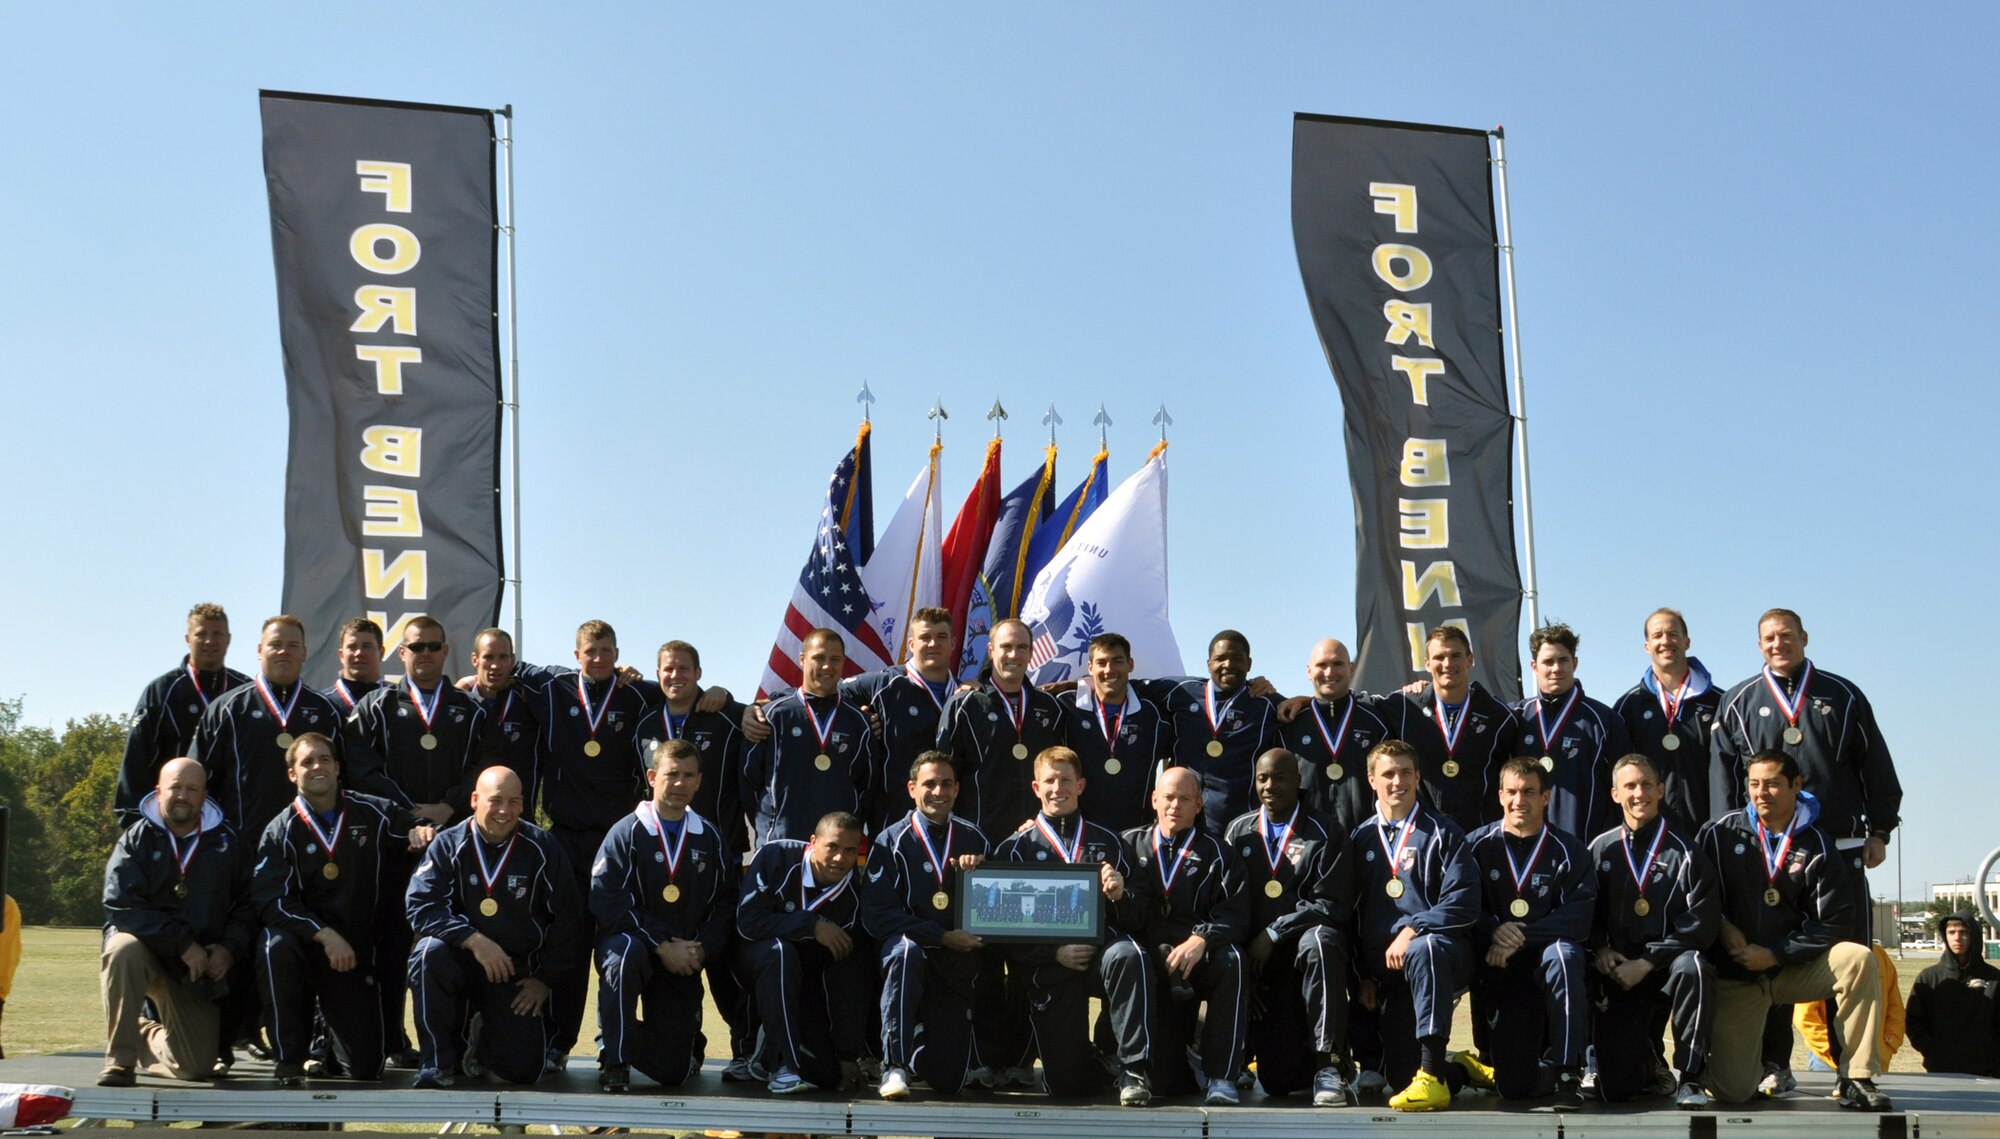 The Air Force rugby team wears their medals after they emerged as champions of the 2010 Armed Forces Rugby Championship tournament, held in Ft. Benning, Ga. (Courtesy photo)